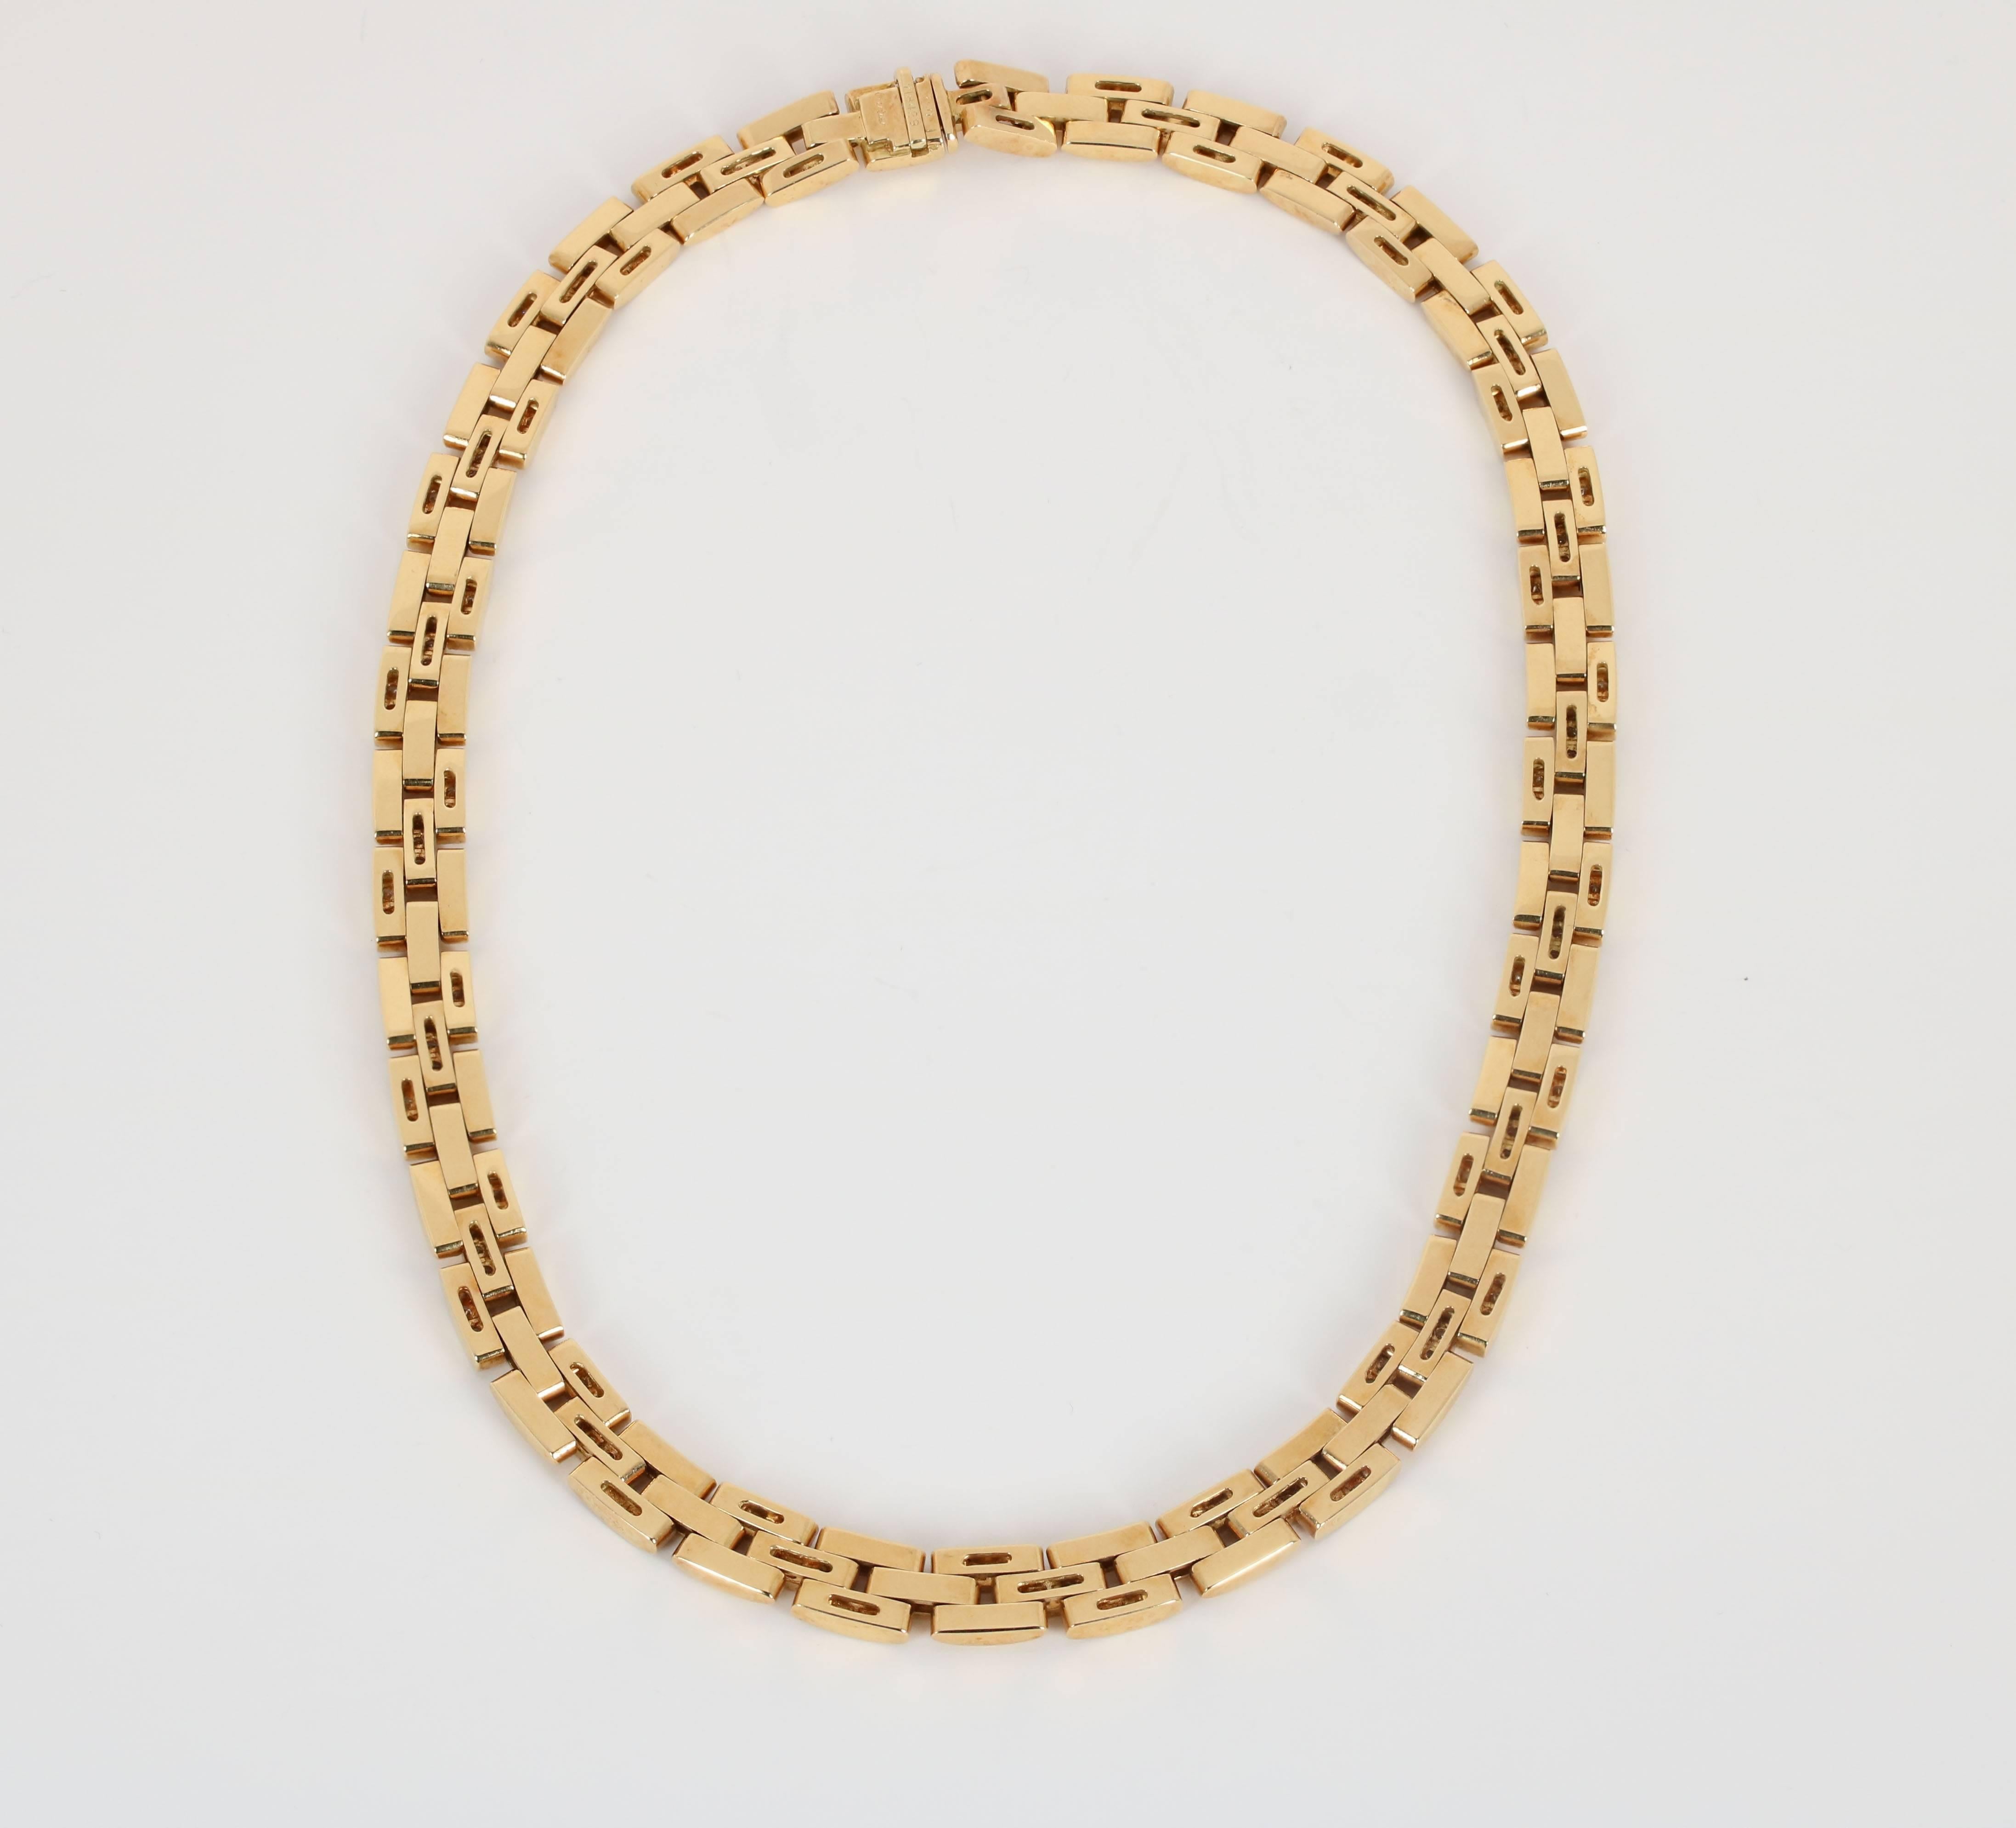 Cartier 18K yellow gold Maillon Panthère diamond necklace 3 row
240 diamonds approximately 7 carats
Serial# 718xxx
Model CRN701300
42 cm/ 16.5 inches
With suede/leather pouch and copy of insurance appraisal